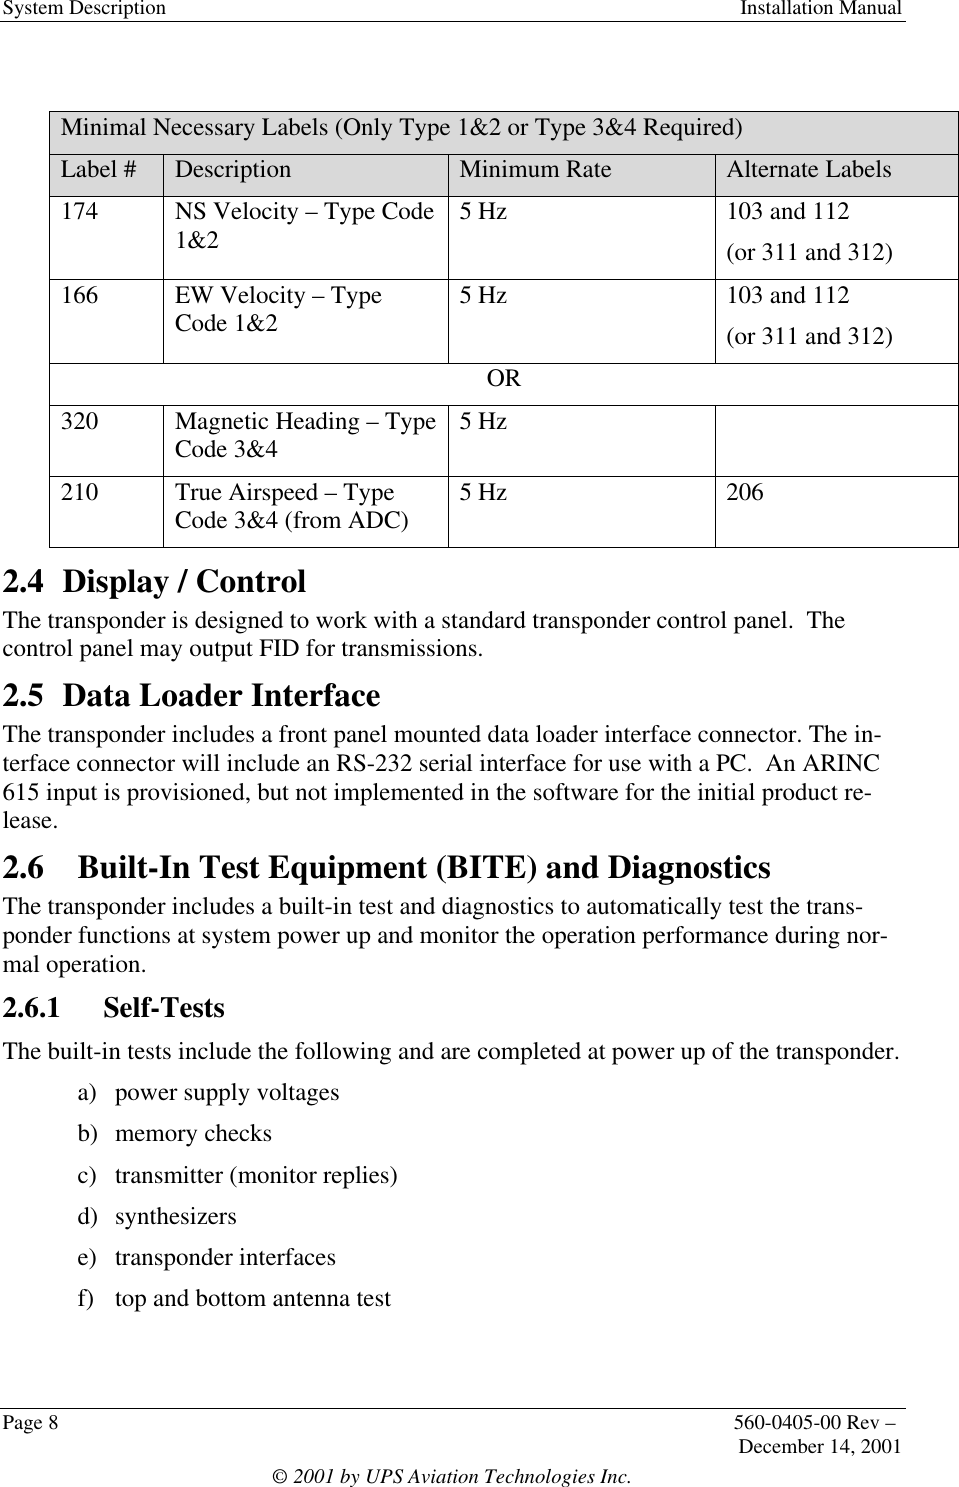 System Description Installation ManualPage 8560-0405-00 Rev –December 14, 2001© 2001 by UPS Aviation Technologies Inc.Minimal Necessary Labels (Only Type 1&amp;2 or Type 3&amp;4 Required)Label # Description Minimum Rate Alternate Labels174 NS Velocity – Type Code1&amp;2 5 Hz 103 and 112(or 311 and 312)166 EW Velocity – TypeCode 1&amp;2 5 Hz 103 and 112(or 311 and 312)OR320 Magnetic Heading – TypeCode 3&amp;4 5 Hz210 True Airspeed – TypeCode 3&amp;4 (from ADC) 5 Hz 2062.4 Display / ControlThe transponder is designed to work with a standard transponder control panel.  Thecontrol panel may output FID for transmissions.2.5 Data Loader InterfaceThe transponder includes a front panel mounted data loader interface connector. The in-terface connector will include an RS-232 serial interface for use with a PC.  An ARINC615 input is provisioned, but not implemented in the software for the initial product re-lease.2.6 Built-In Test Equipment (BITE) and DiagnosticsThe transponder includes a built-in test and diagnostics to automatically test the trans-ponder functions at system power up and monitor the operation performance during nor-mal operation.2.6.1  Self-TestsThe built-in tests include the following and are completed at power up of the transponder.a) power supply voltagesb) memory checksc) transmitter (monitor replies)d) synthesizerse) transponder interfacesf) top and bottom antenna test